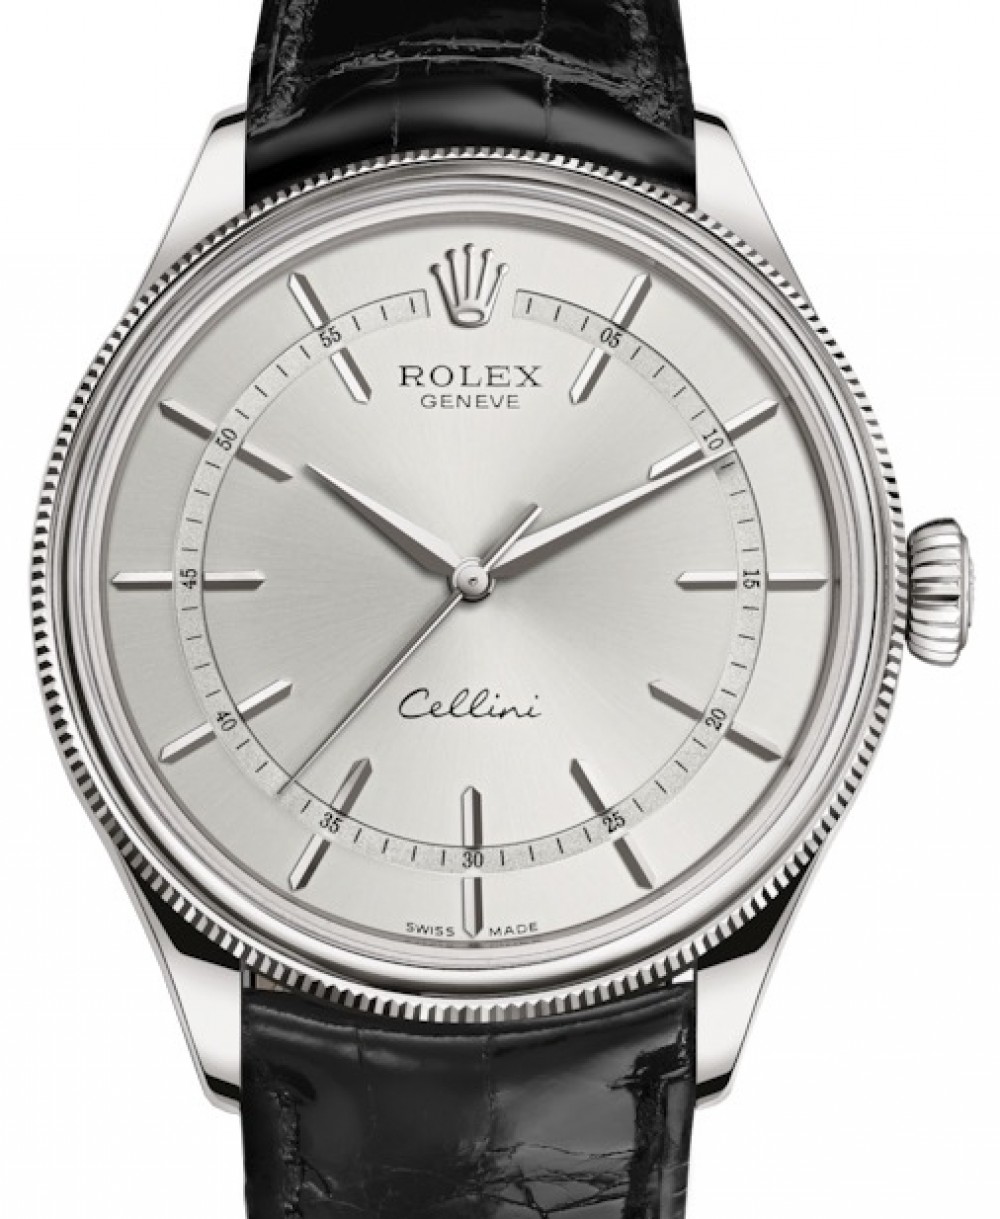 Rolex Cellini Time White Gold Rhodium Index Dial Domed & Fluted Double  Bezel Black Leather Bracelet 50509 - BRAND NEW